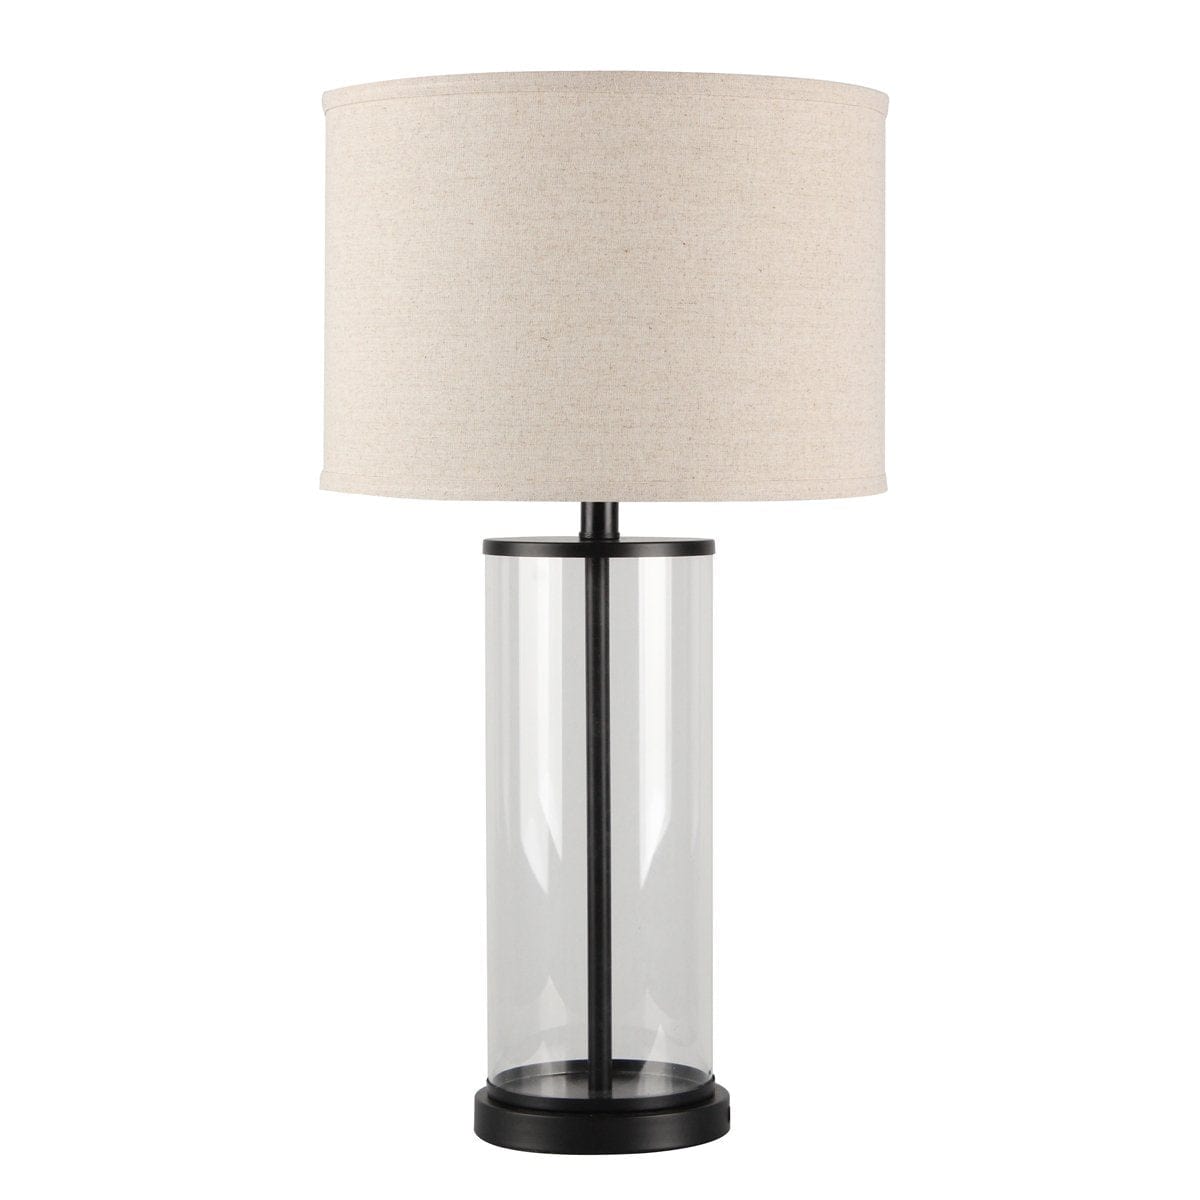 CAFE LIGHTING & LIVING Table Lamp Left Bank Table Lamp - Black w Natural Shade B12261